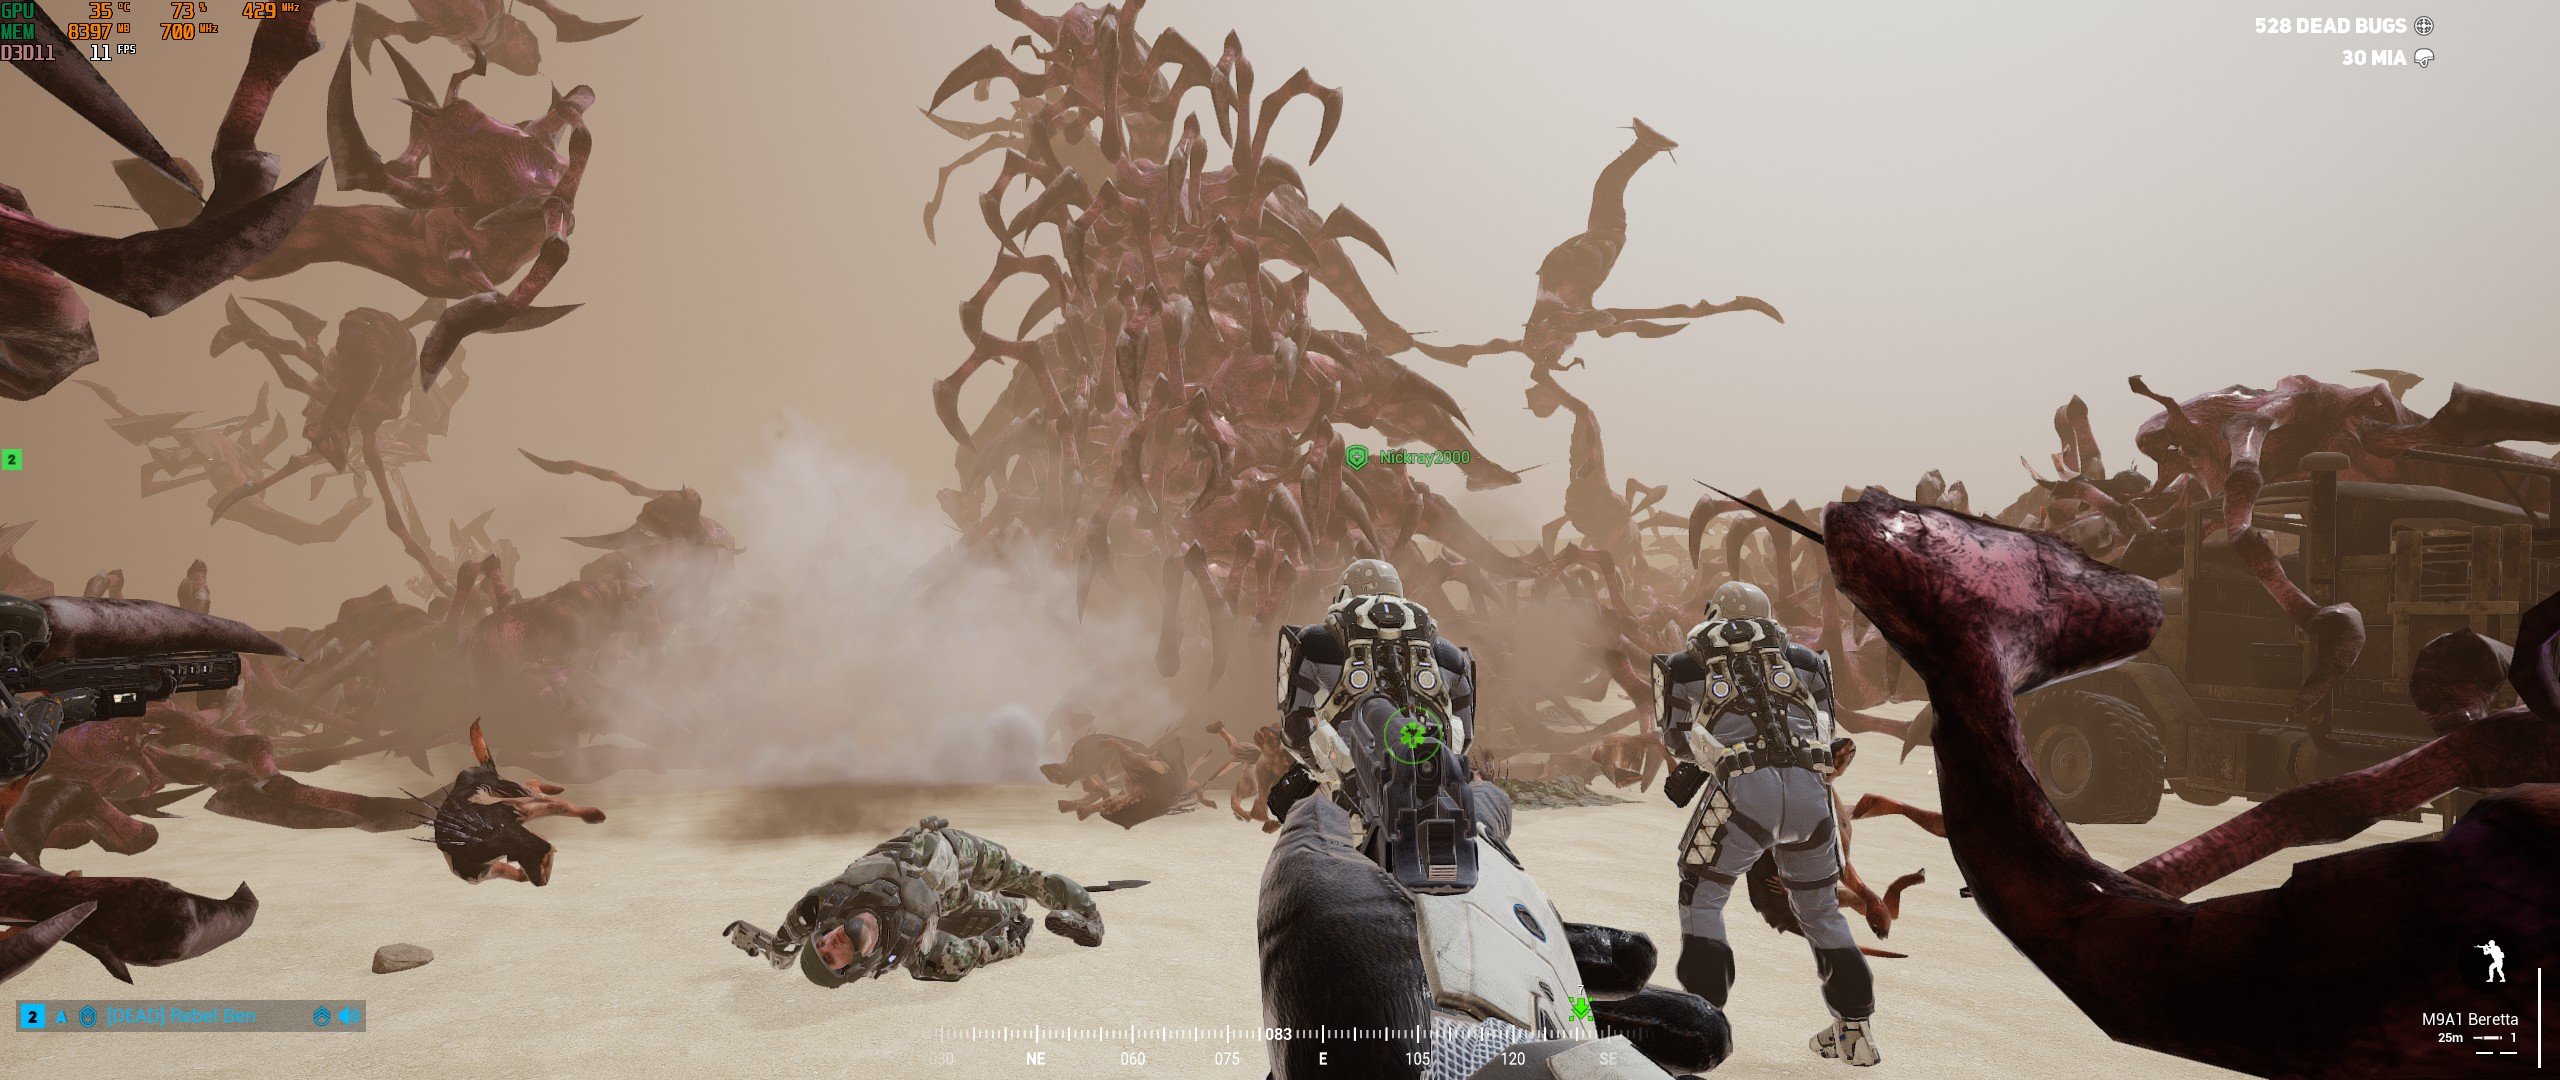 Squad Starship Troopers Mod. Starship Troopers v0.5.0.24 QUICKSAVE Fix. Yes Wurm Starship Trooper. Юниты ласт стенд